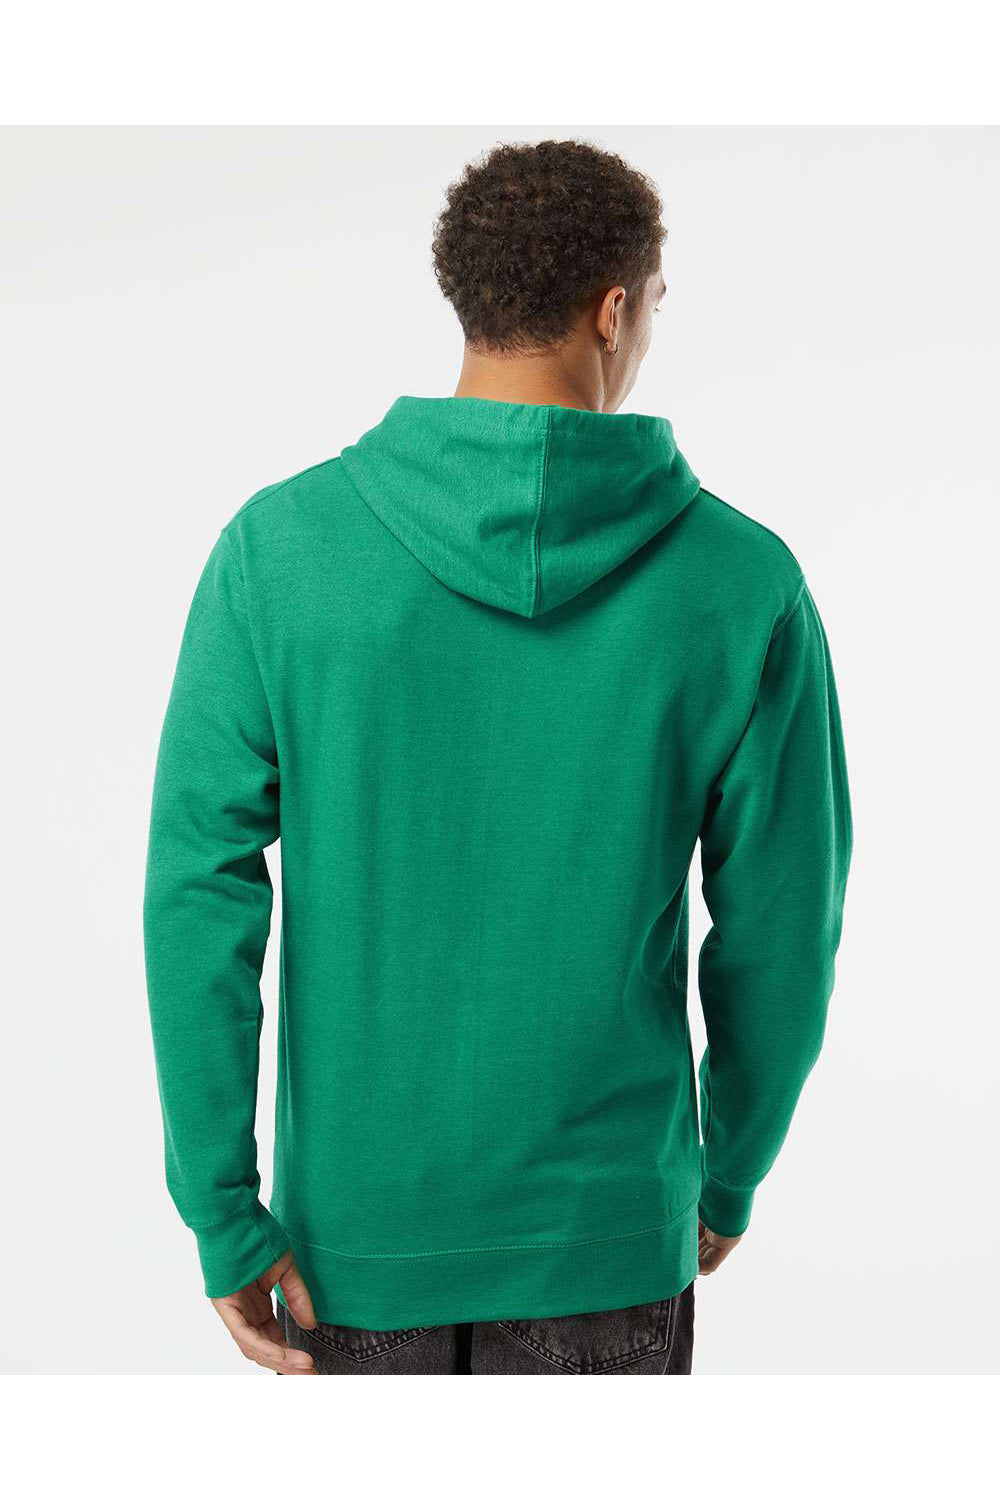 Independent Trading Co. SS4500 Mens Hooded Sweatshirt Hoodie Heather Kelly Green Model Back